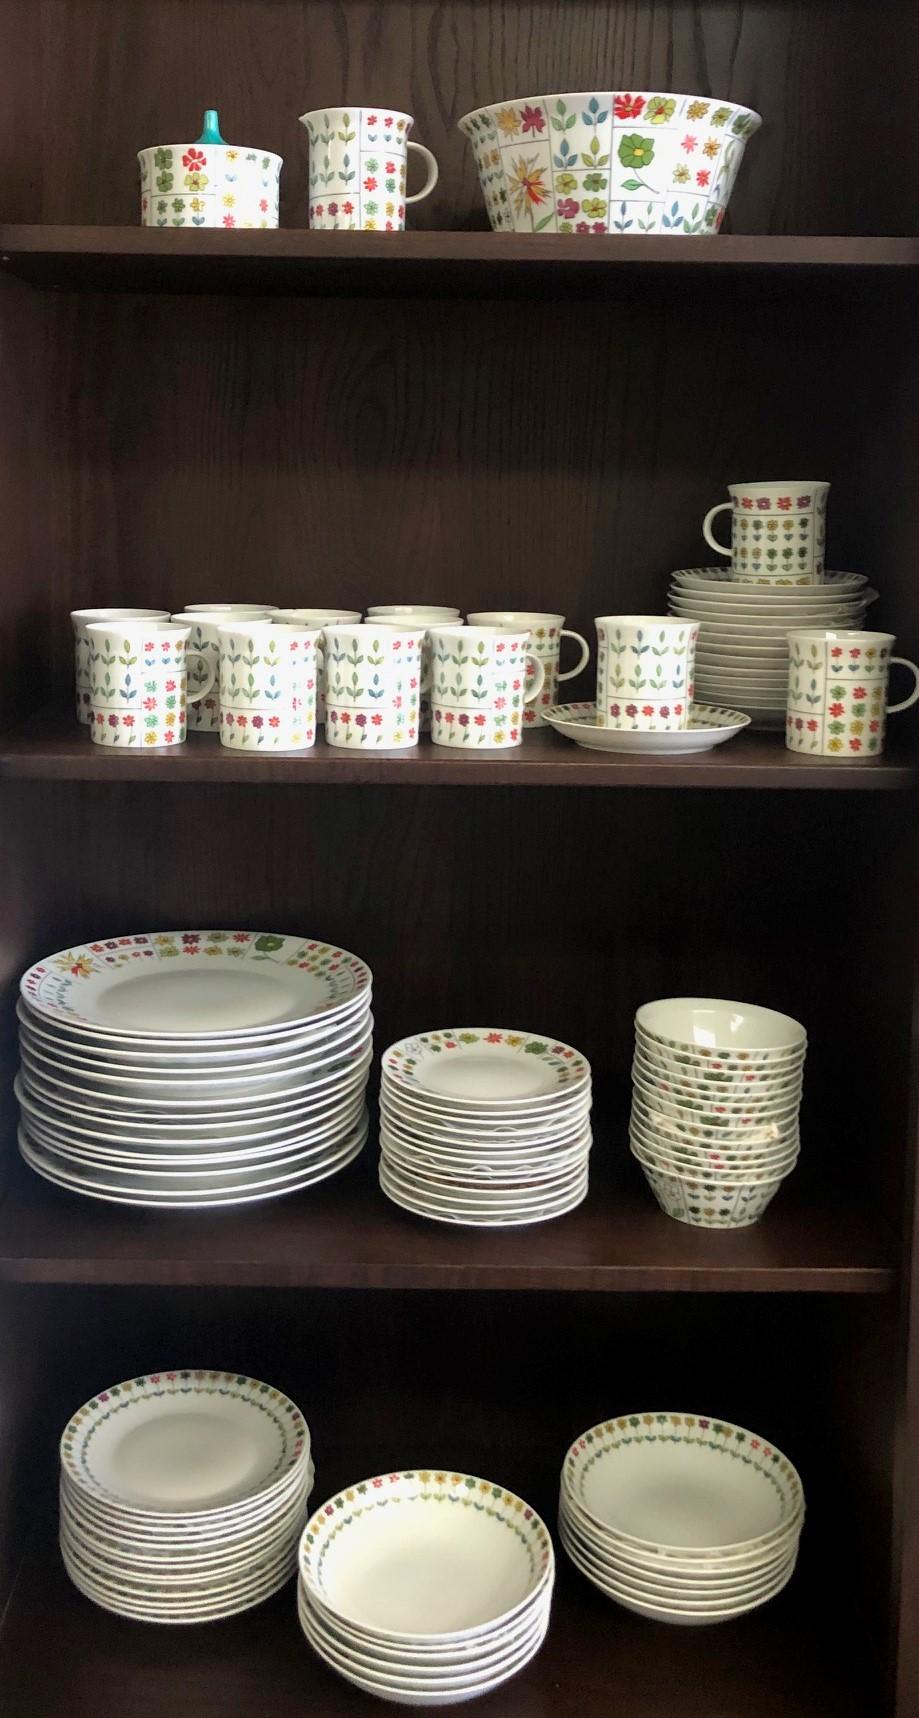 Mid-Century Modern Collection of Piemonte Dinnerware by Emilio Pucci for Rosenthal Studio Line